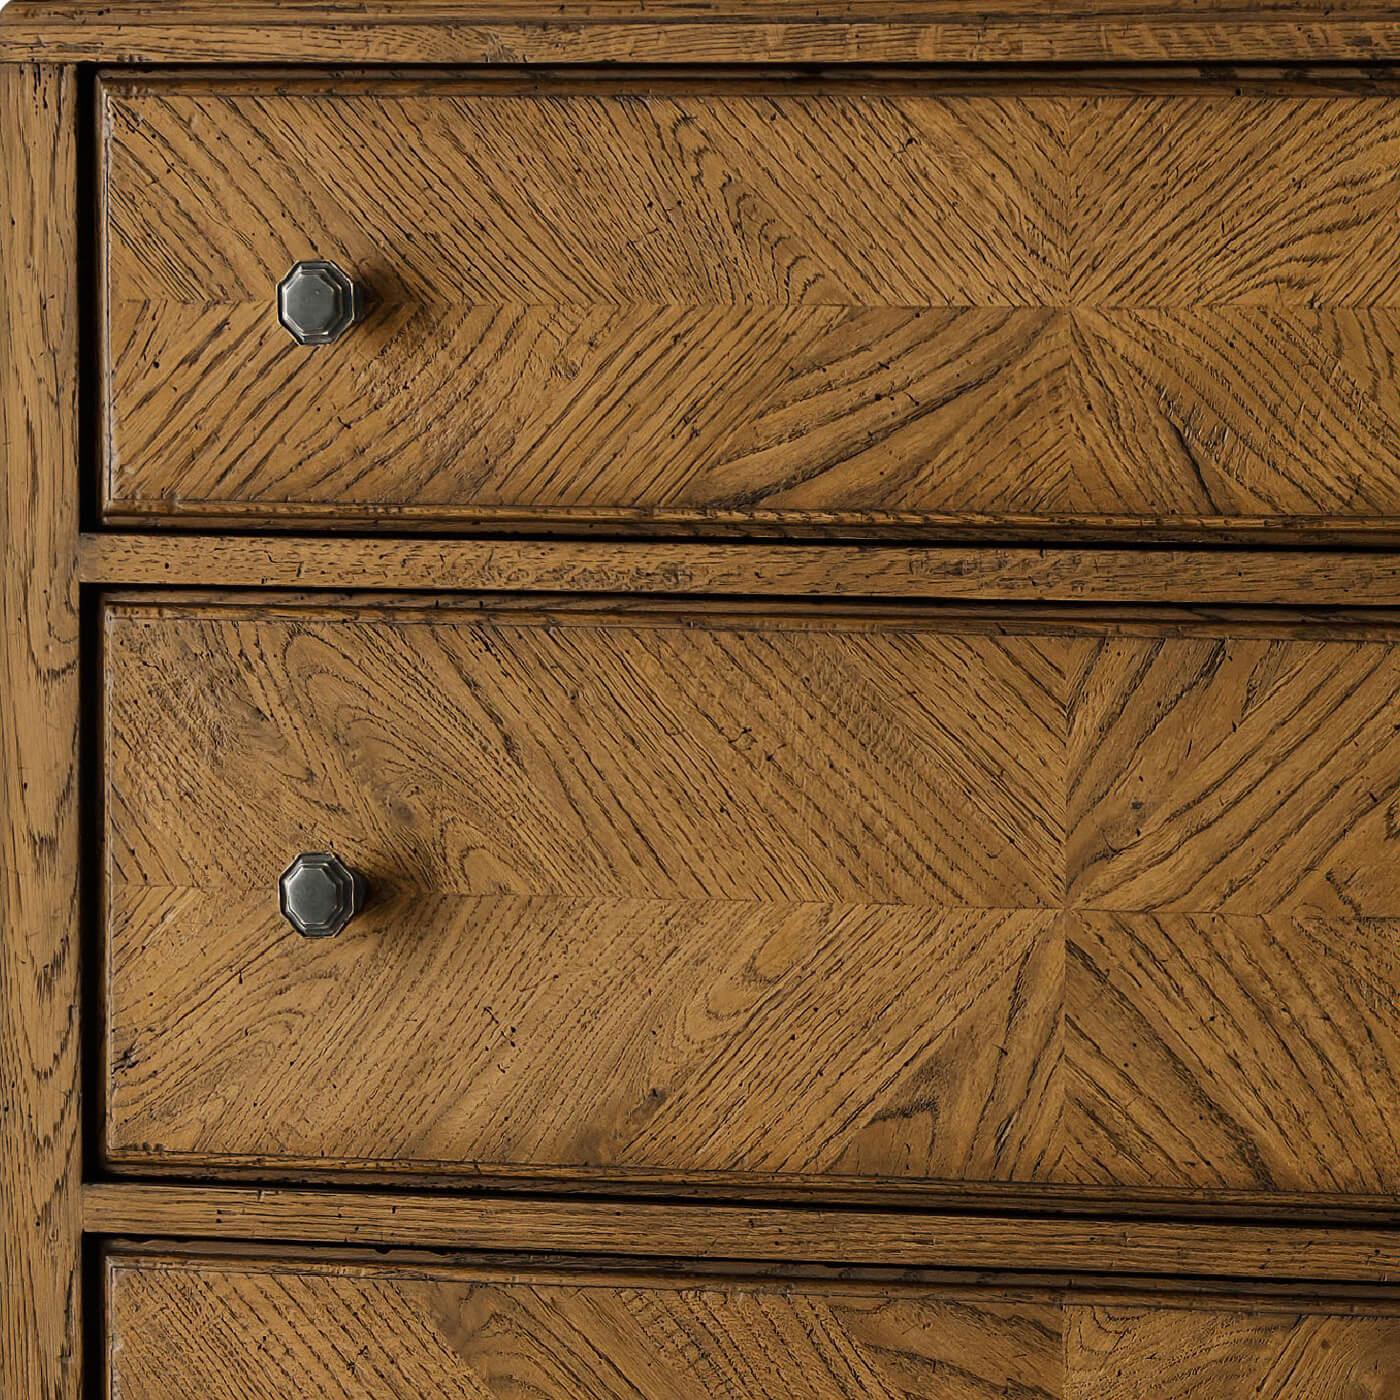 A neo classic style dark oak parquetry tall chest of drawers with mirrored herringbone oak parquetry including five deep drawers accented with Verde Bronze finished handles on tapered oak legs in our dusk finish.

Dimensions: 36